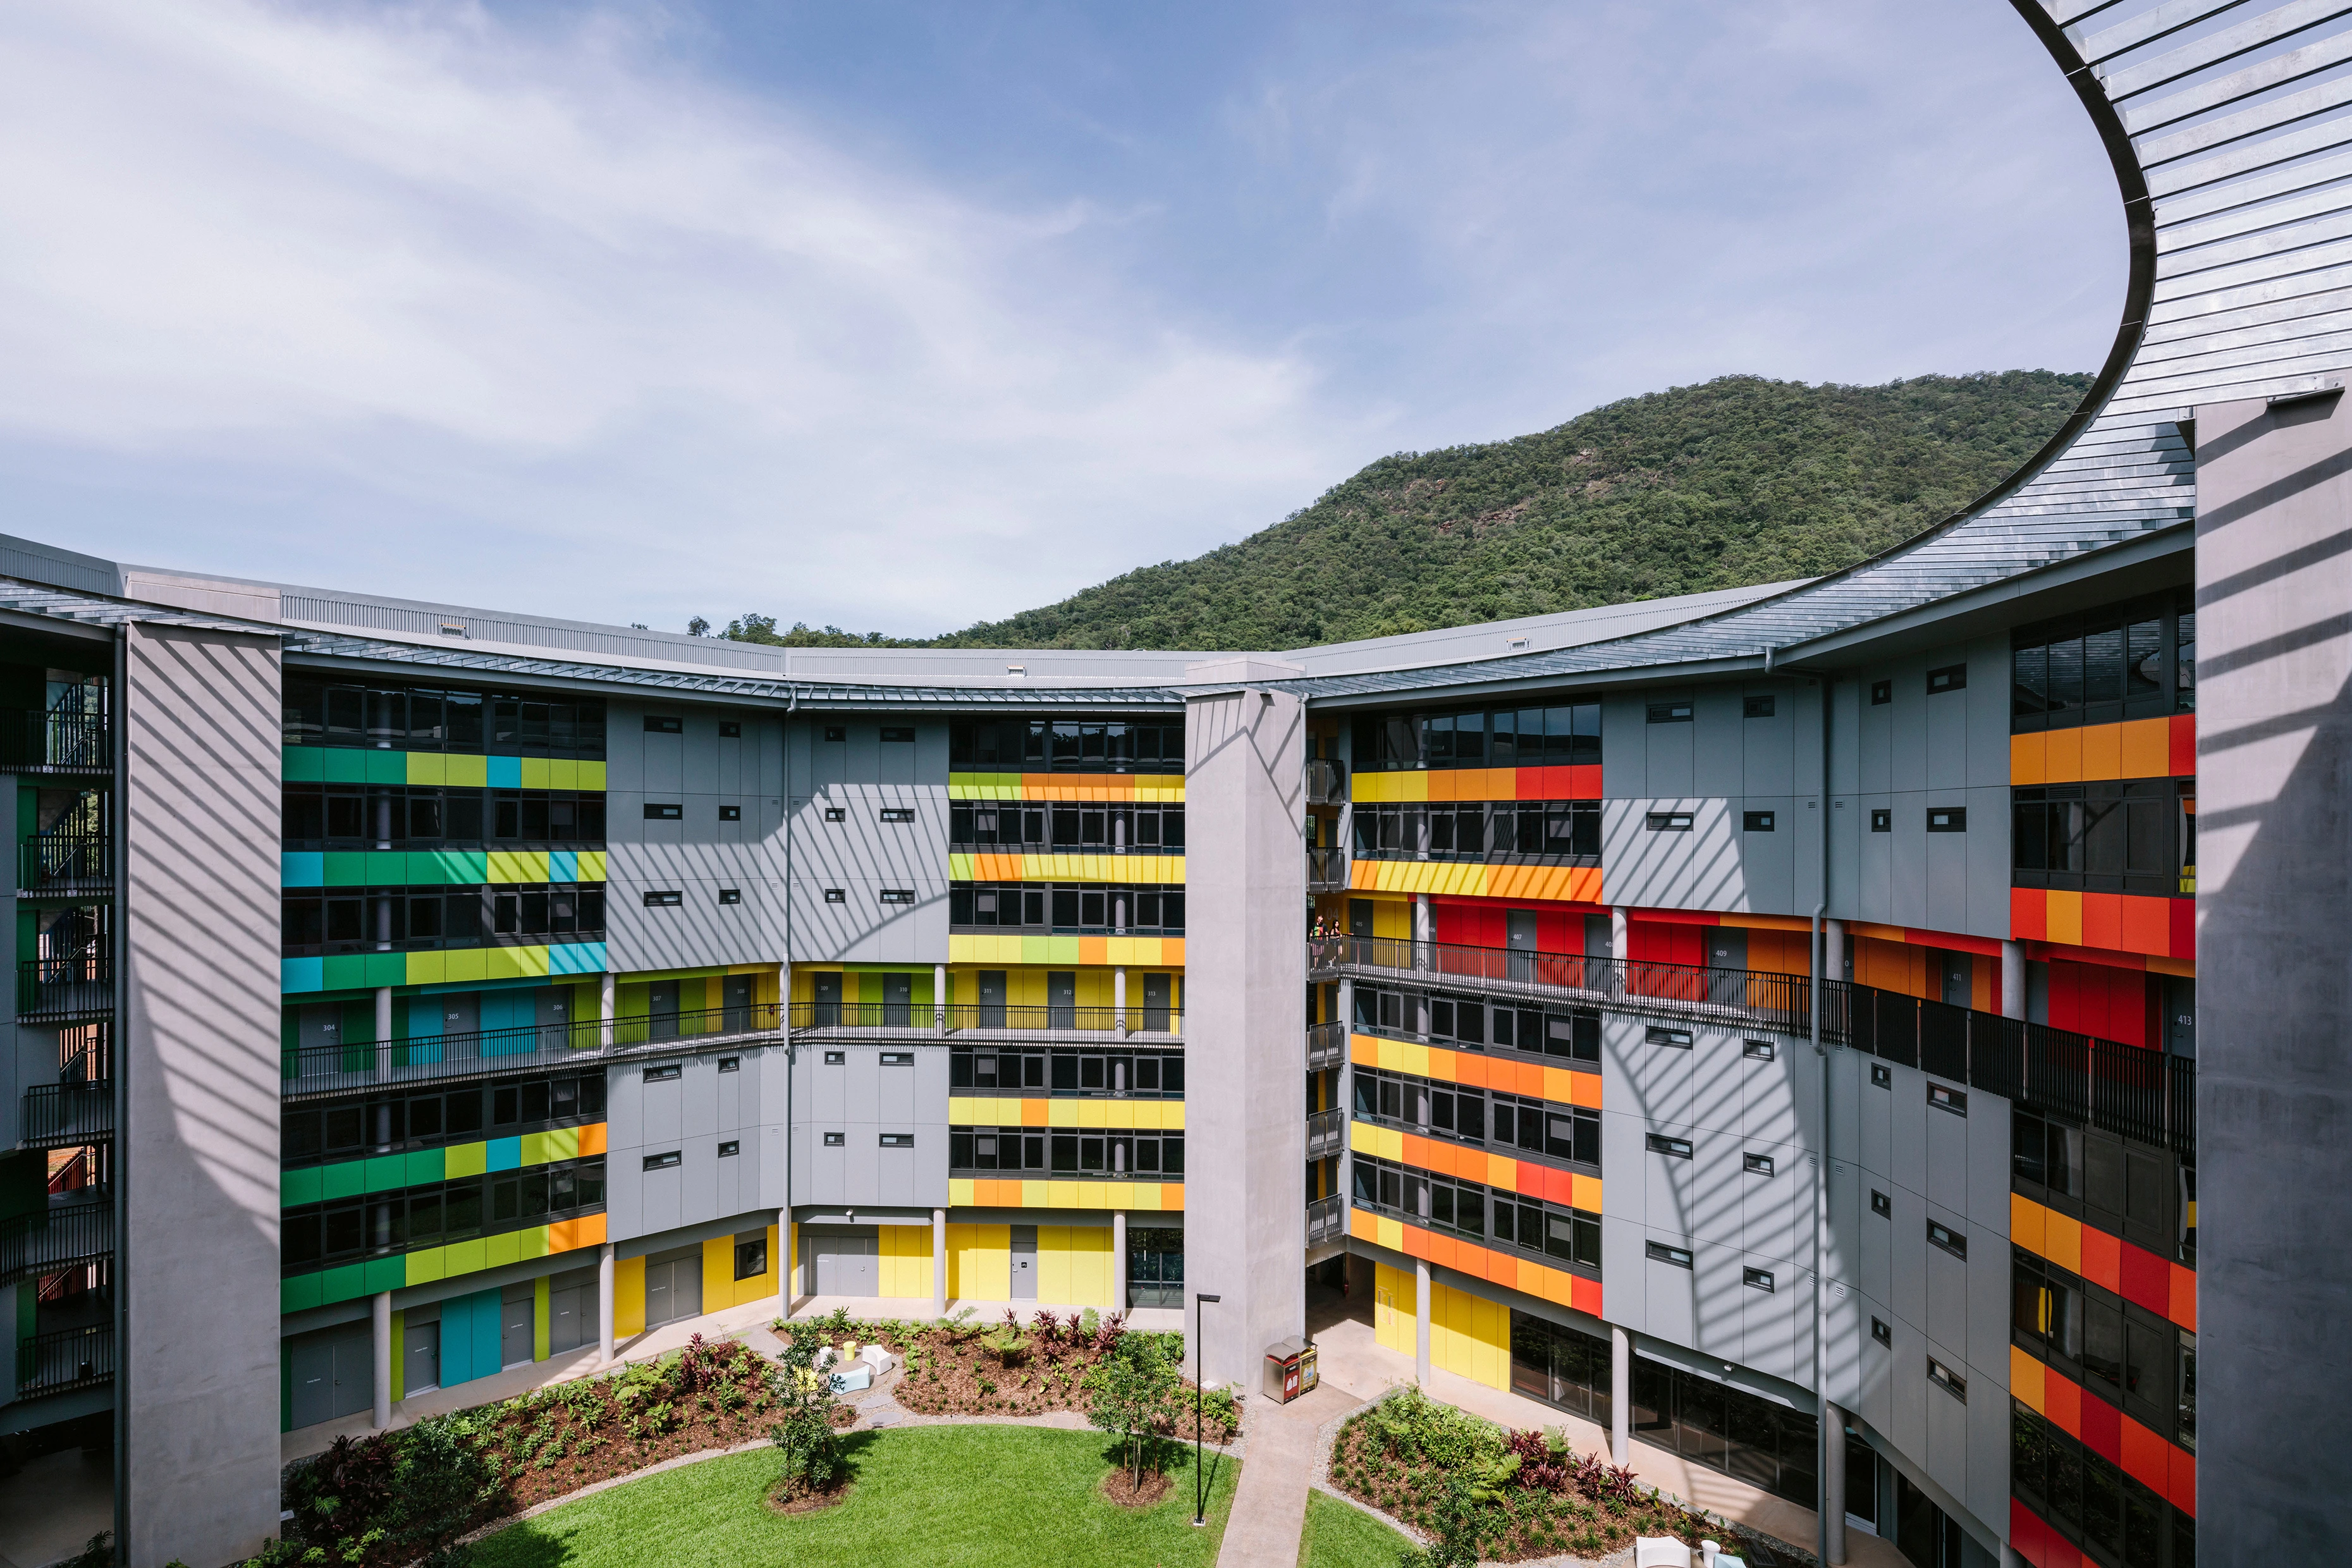 Multi-storey student living quarters with accents of yellow, orange, blue, green and red on walkway walls and balconies